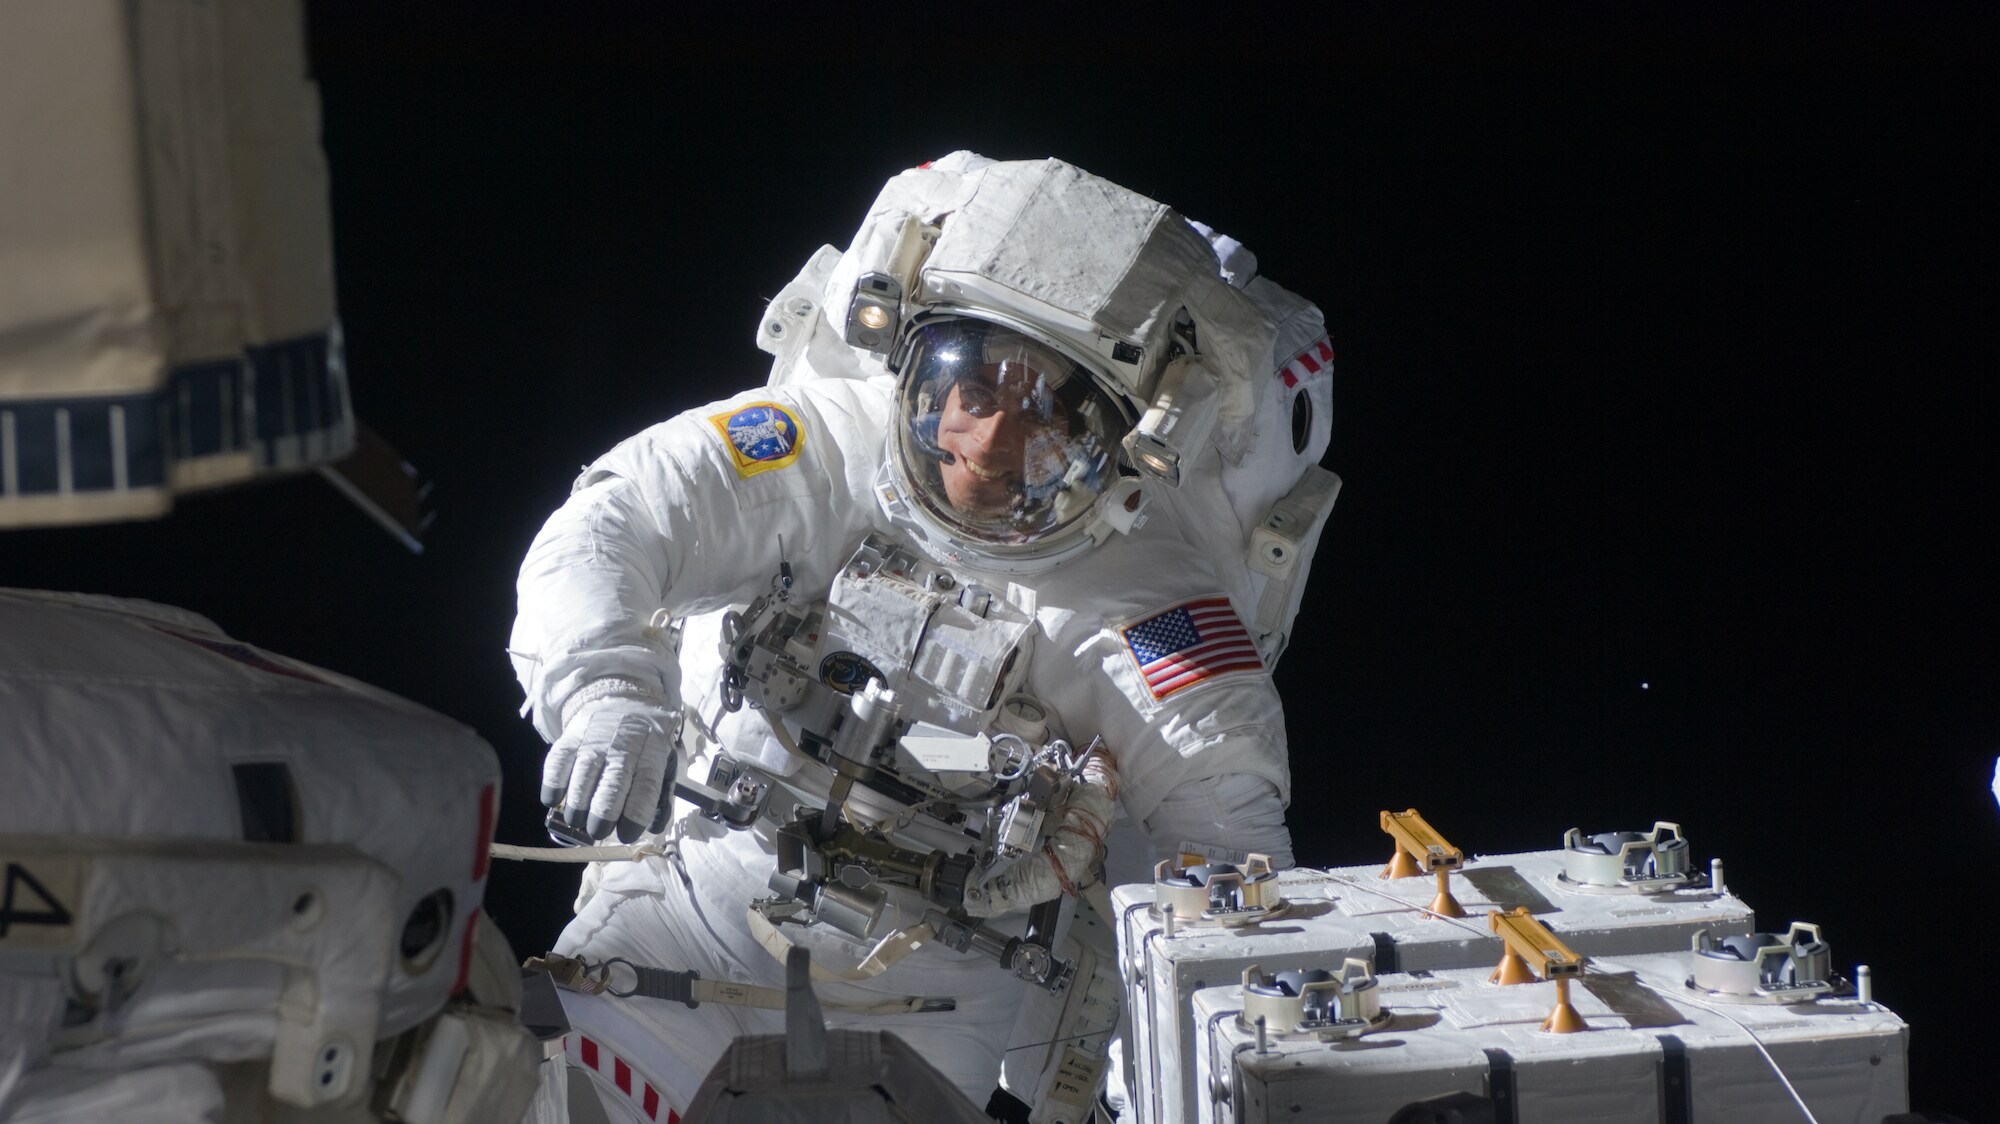 AMONG THE STARS - (27 July 2009) - Astronaut Christopher Cassidy, STS-127 mission specialist, participates in the mission's fifth and final session of extravehicular activity (EVA) as construction and maintenance continue on the International Space Station. During the four-hour, 54-minute spacewalk, Cassidy and astronaut Tom Marshburn (out of frame), mission specialist, secured multi-layer insulation around the Special Purpose Dexterous Manipulator known as Dextre, split out power channels for two space station Control Moment Gyroscopes, installed video cameras on the front and back of the new Japanese Exposed Facility and performed a number of “get ahead” tasks, including tying down some cables and installing handrails and a portable foot restraint to aid future spacewalkers. (NASA)  CHRIS CASSIDY